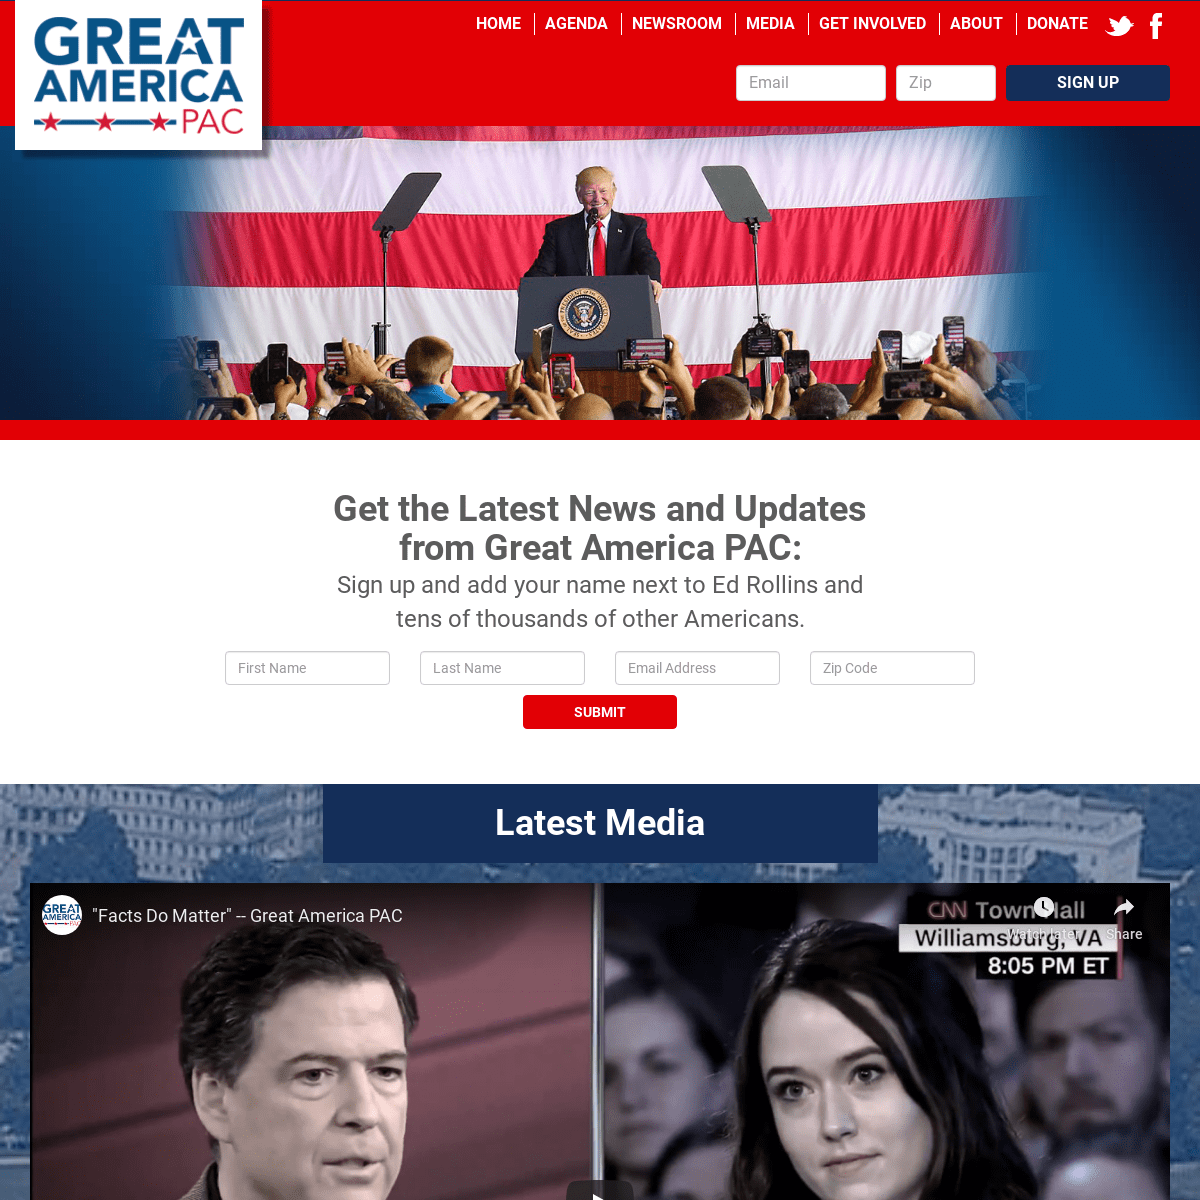 A complete backup of greatamericapac.com